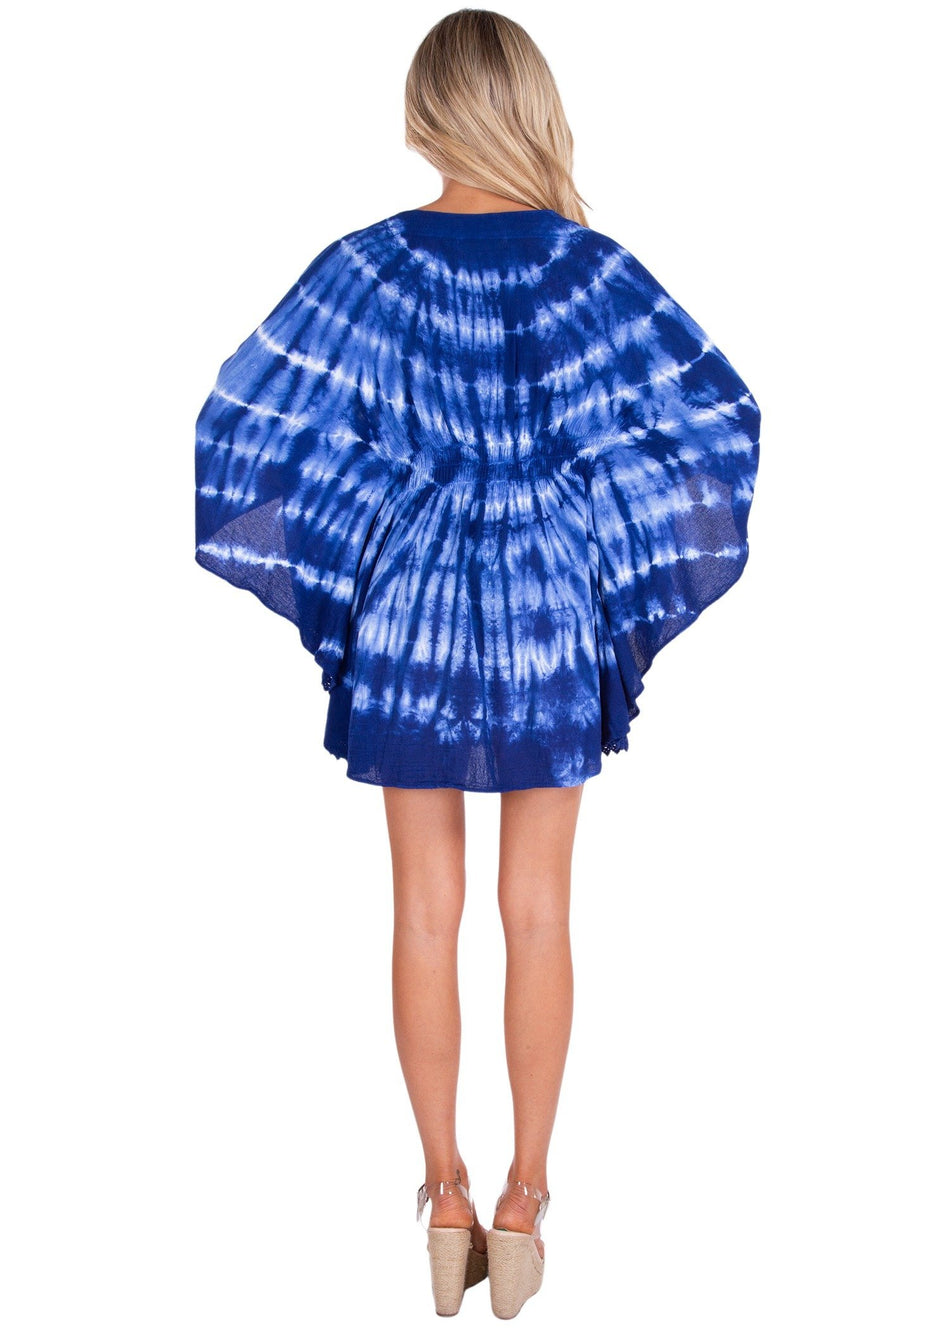 NW1217 - Tie Dye Navy Cotton Cover-Up